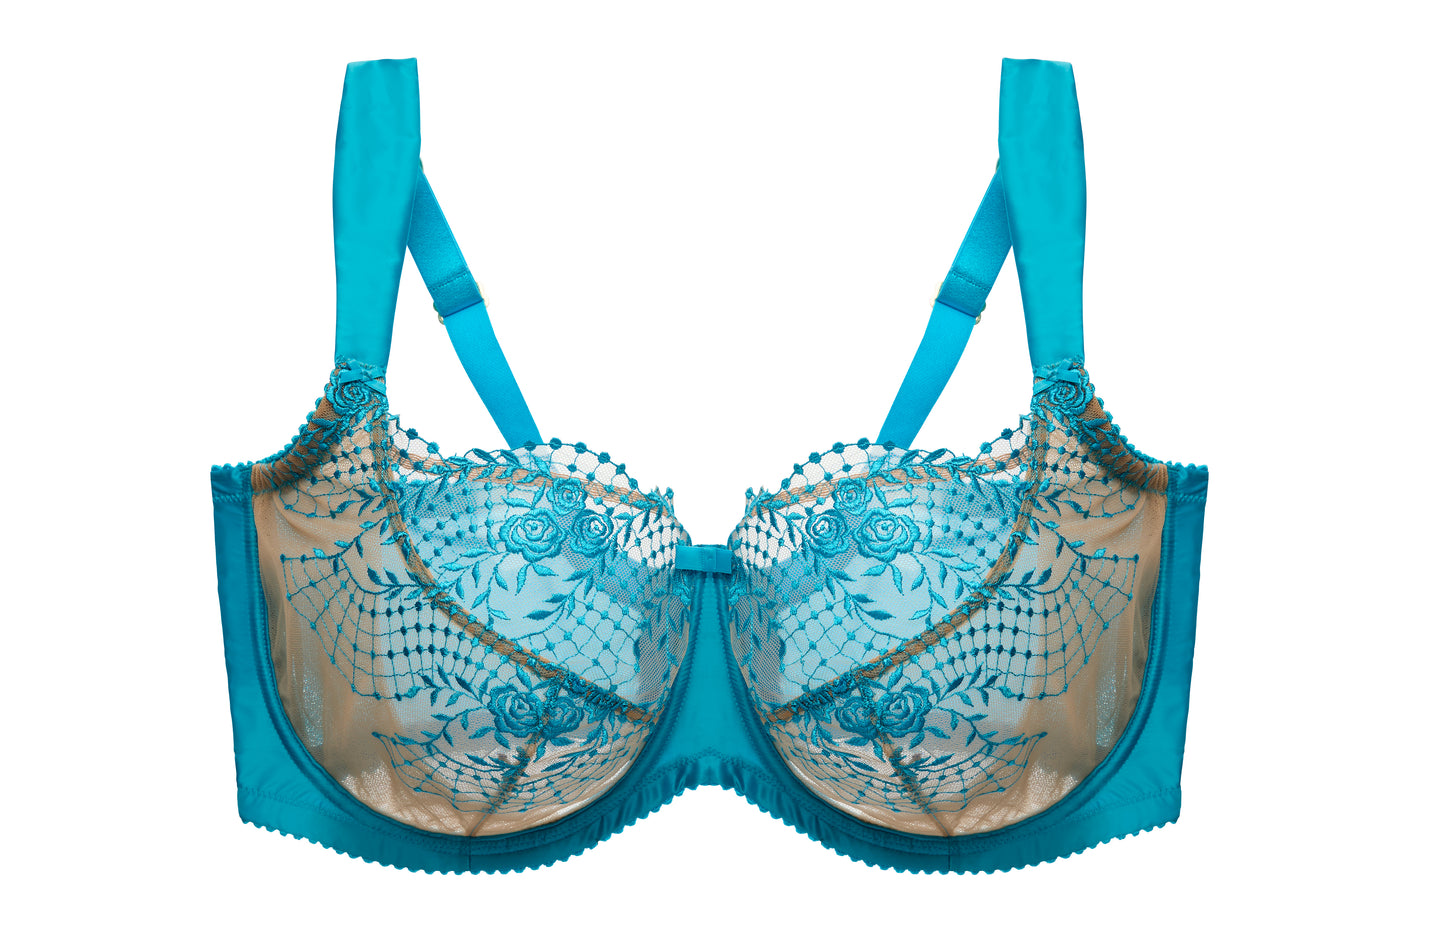 Julie's Roses Curve Bra in Butterfly Blue By Dita Von Teese - 38-44 bands D-G